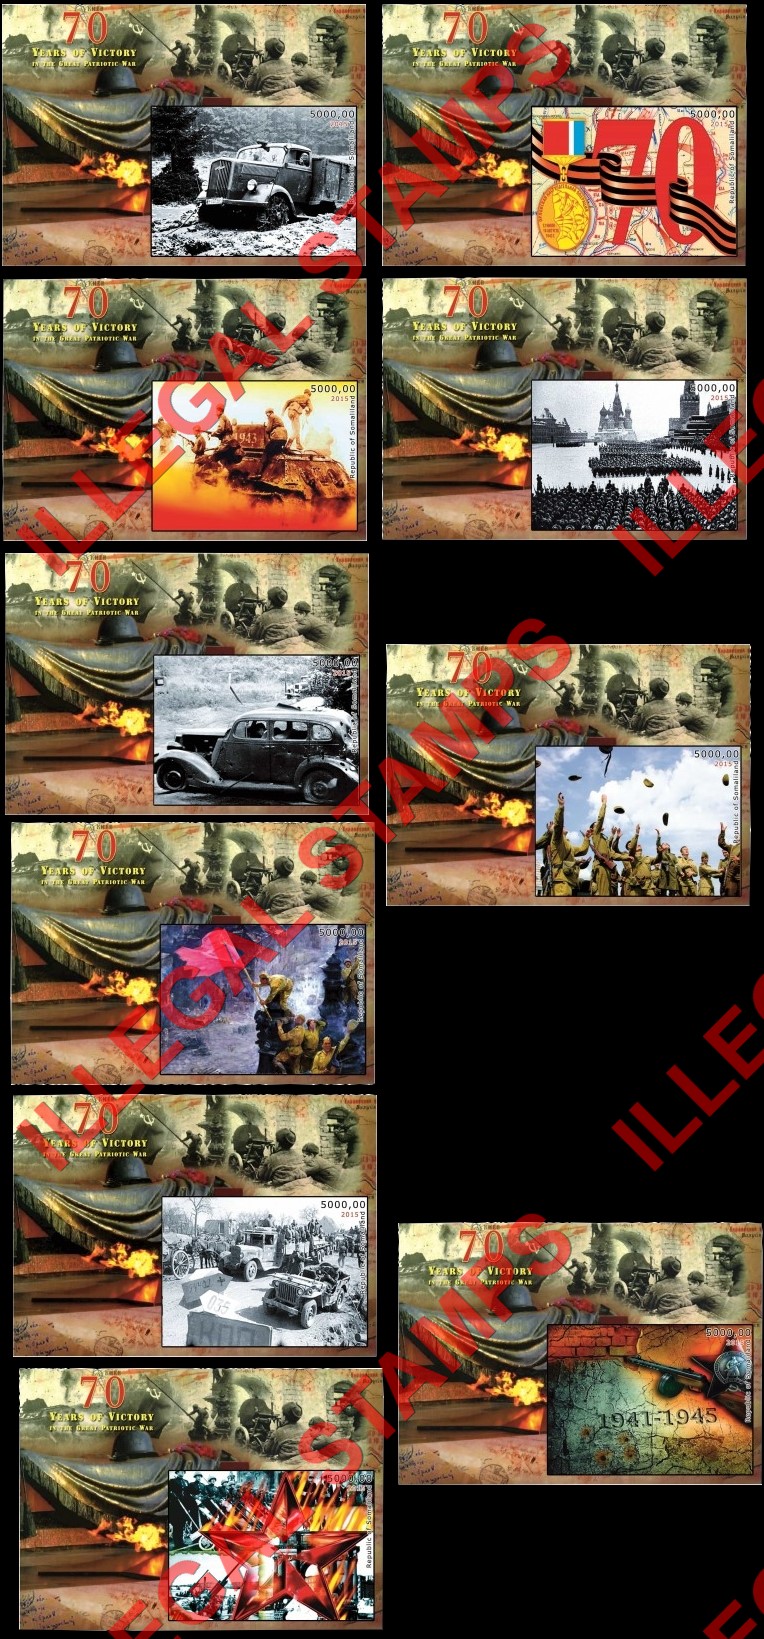 Somaliland 2015 World War II 70 Years of Victory Illegal Stamp Souvenir Sheets of 1 (Part 1)